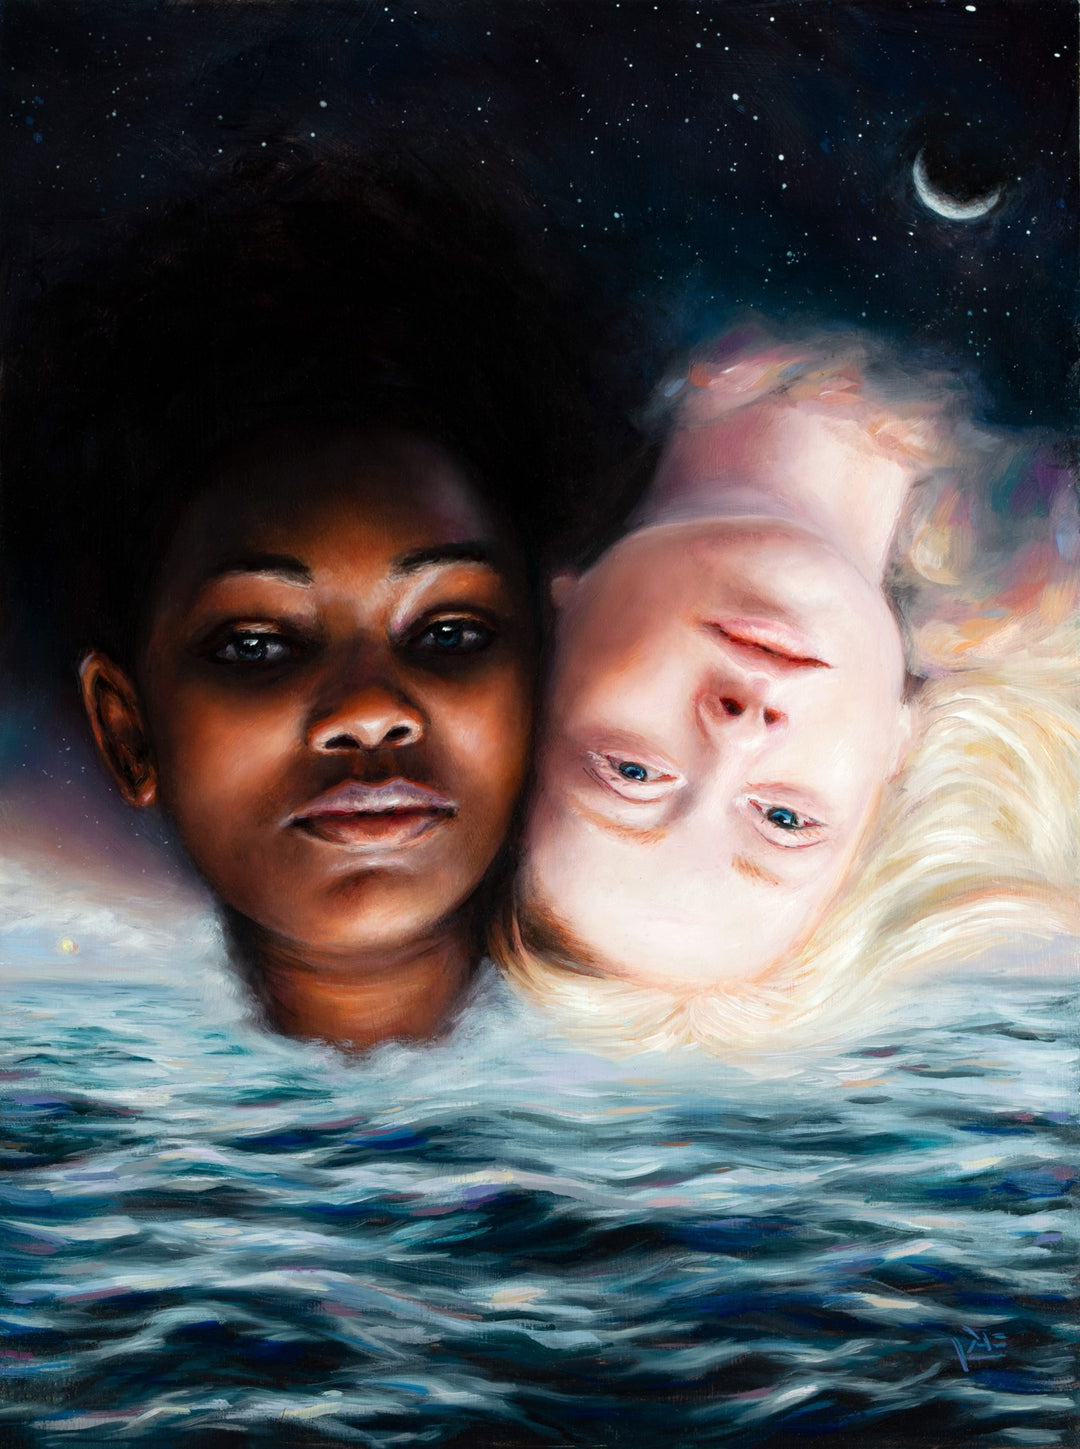 A captivating oil painting titled "Tiffany Dae - "Sea and Stars"" by Tiffany Dae, showcasing two girls immersed in the ocean.